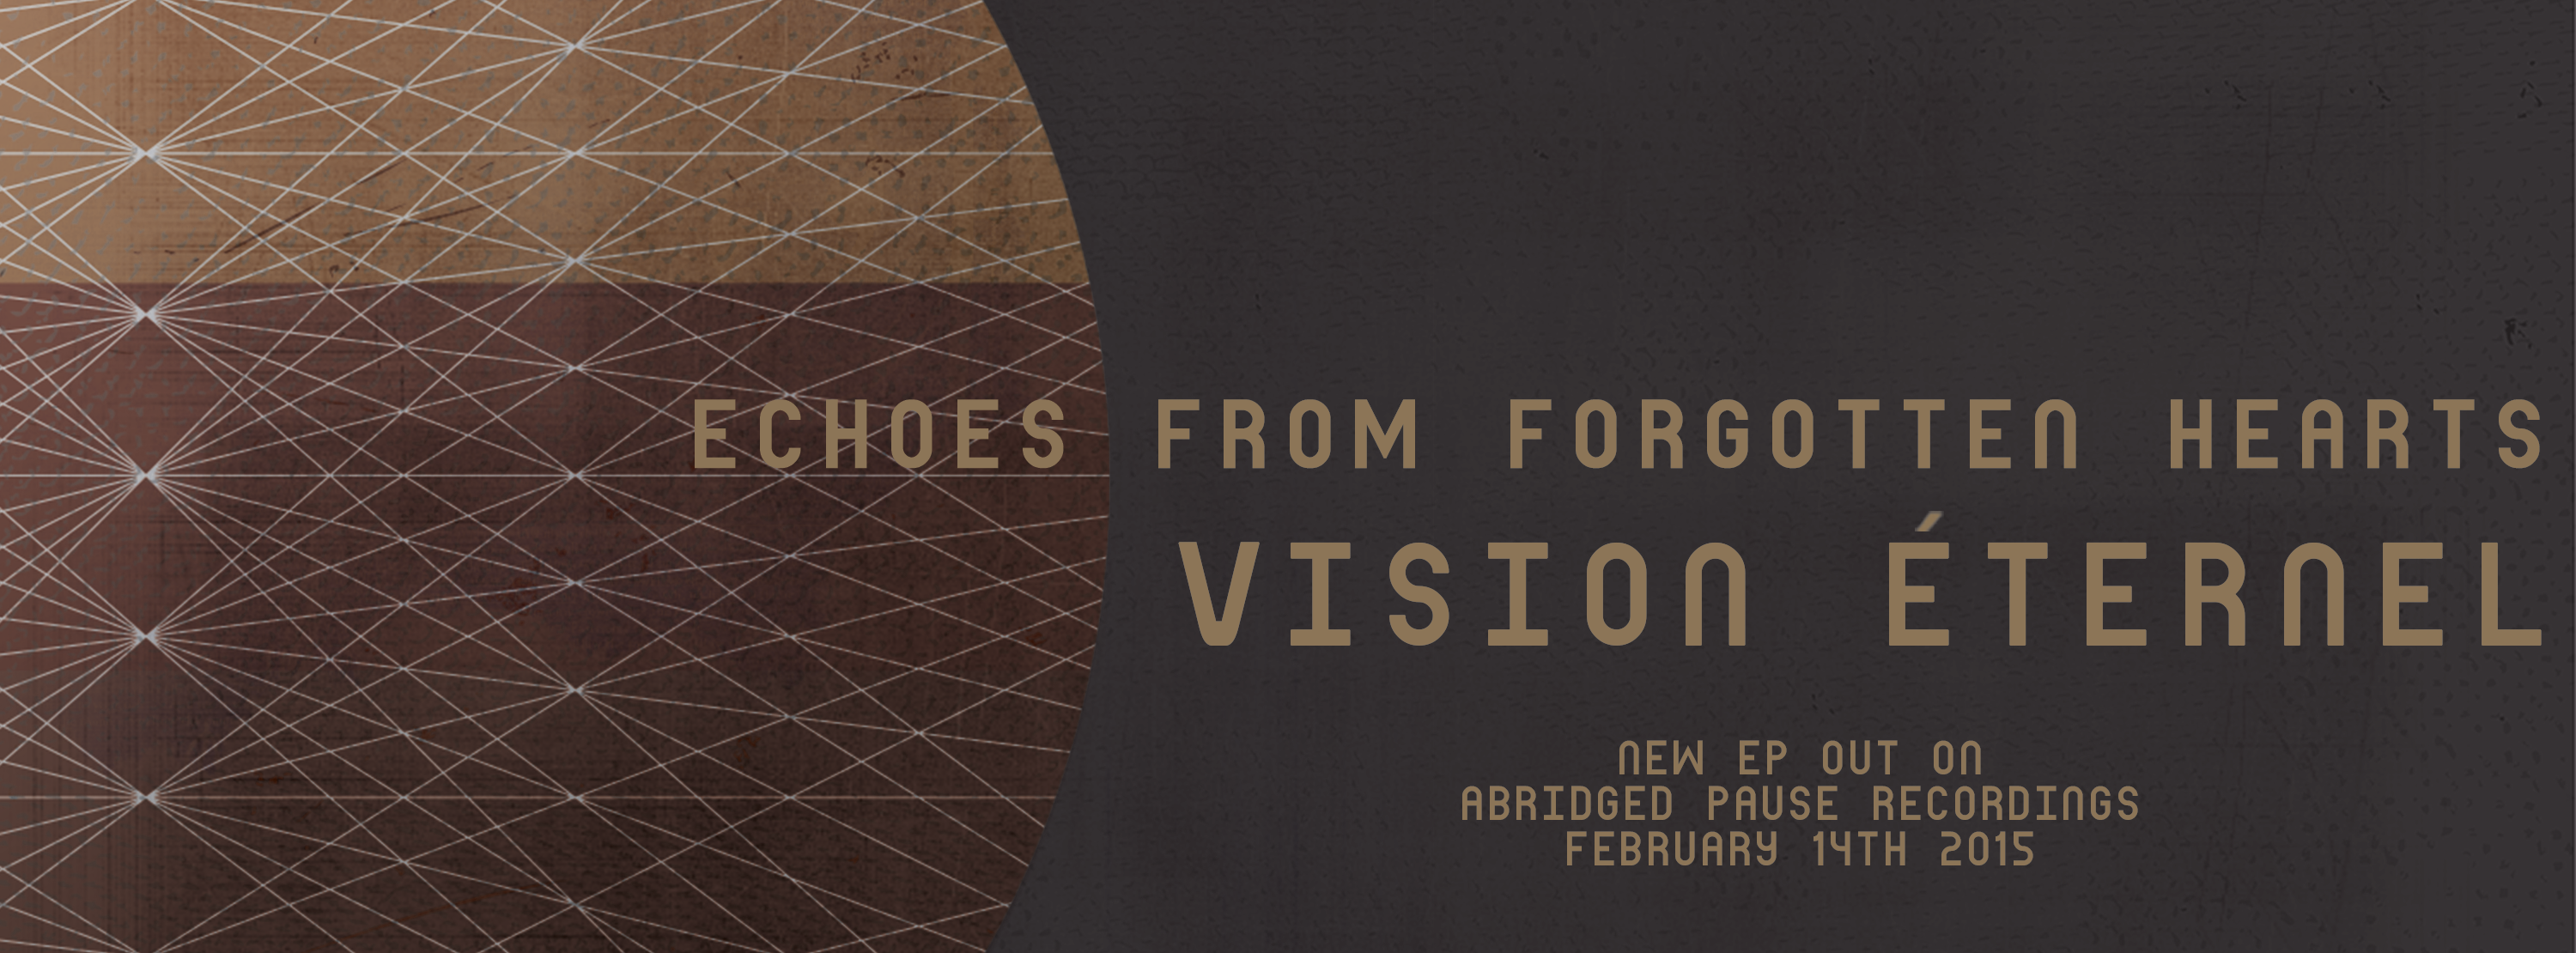 Vision Éternel - "Echoes From Forgotten Hearts" EP flyer.